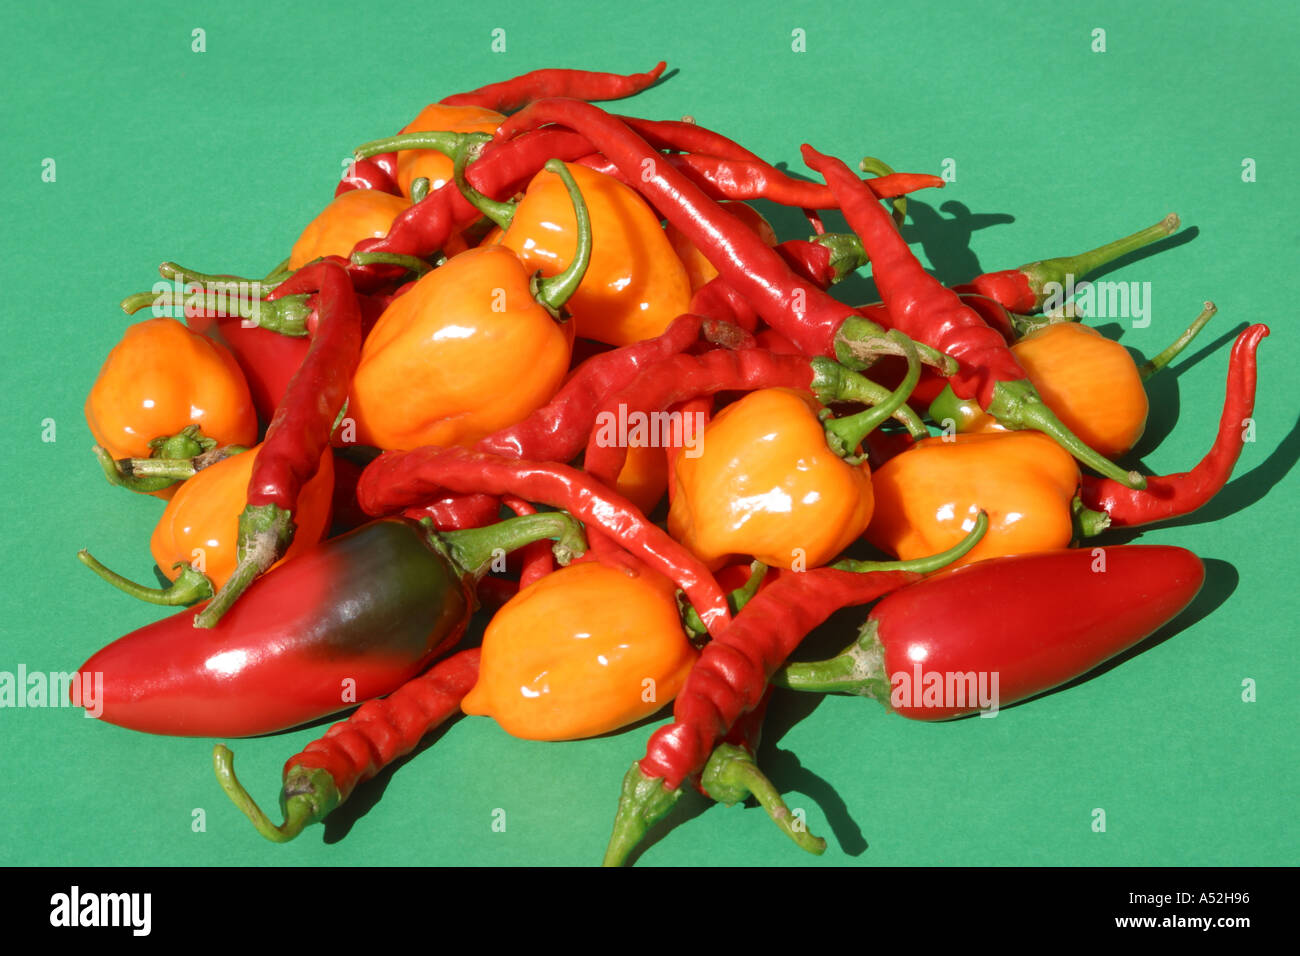 Red peppers hot spicy cayenne peppers stock photography Stock Photo